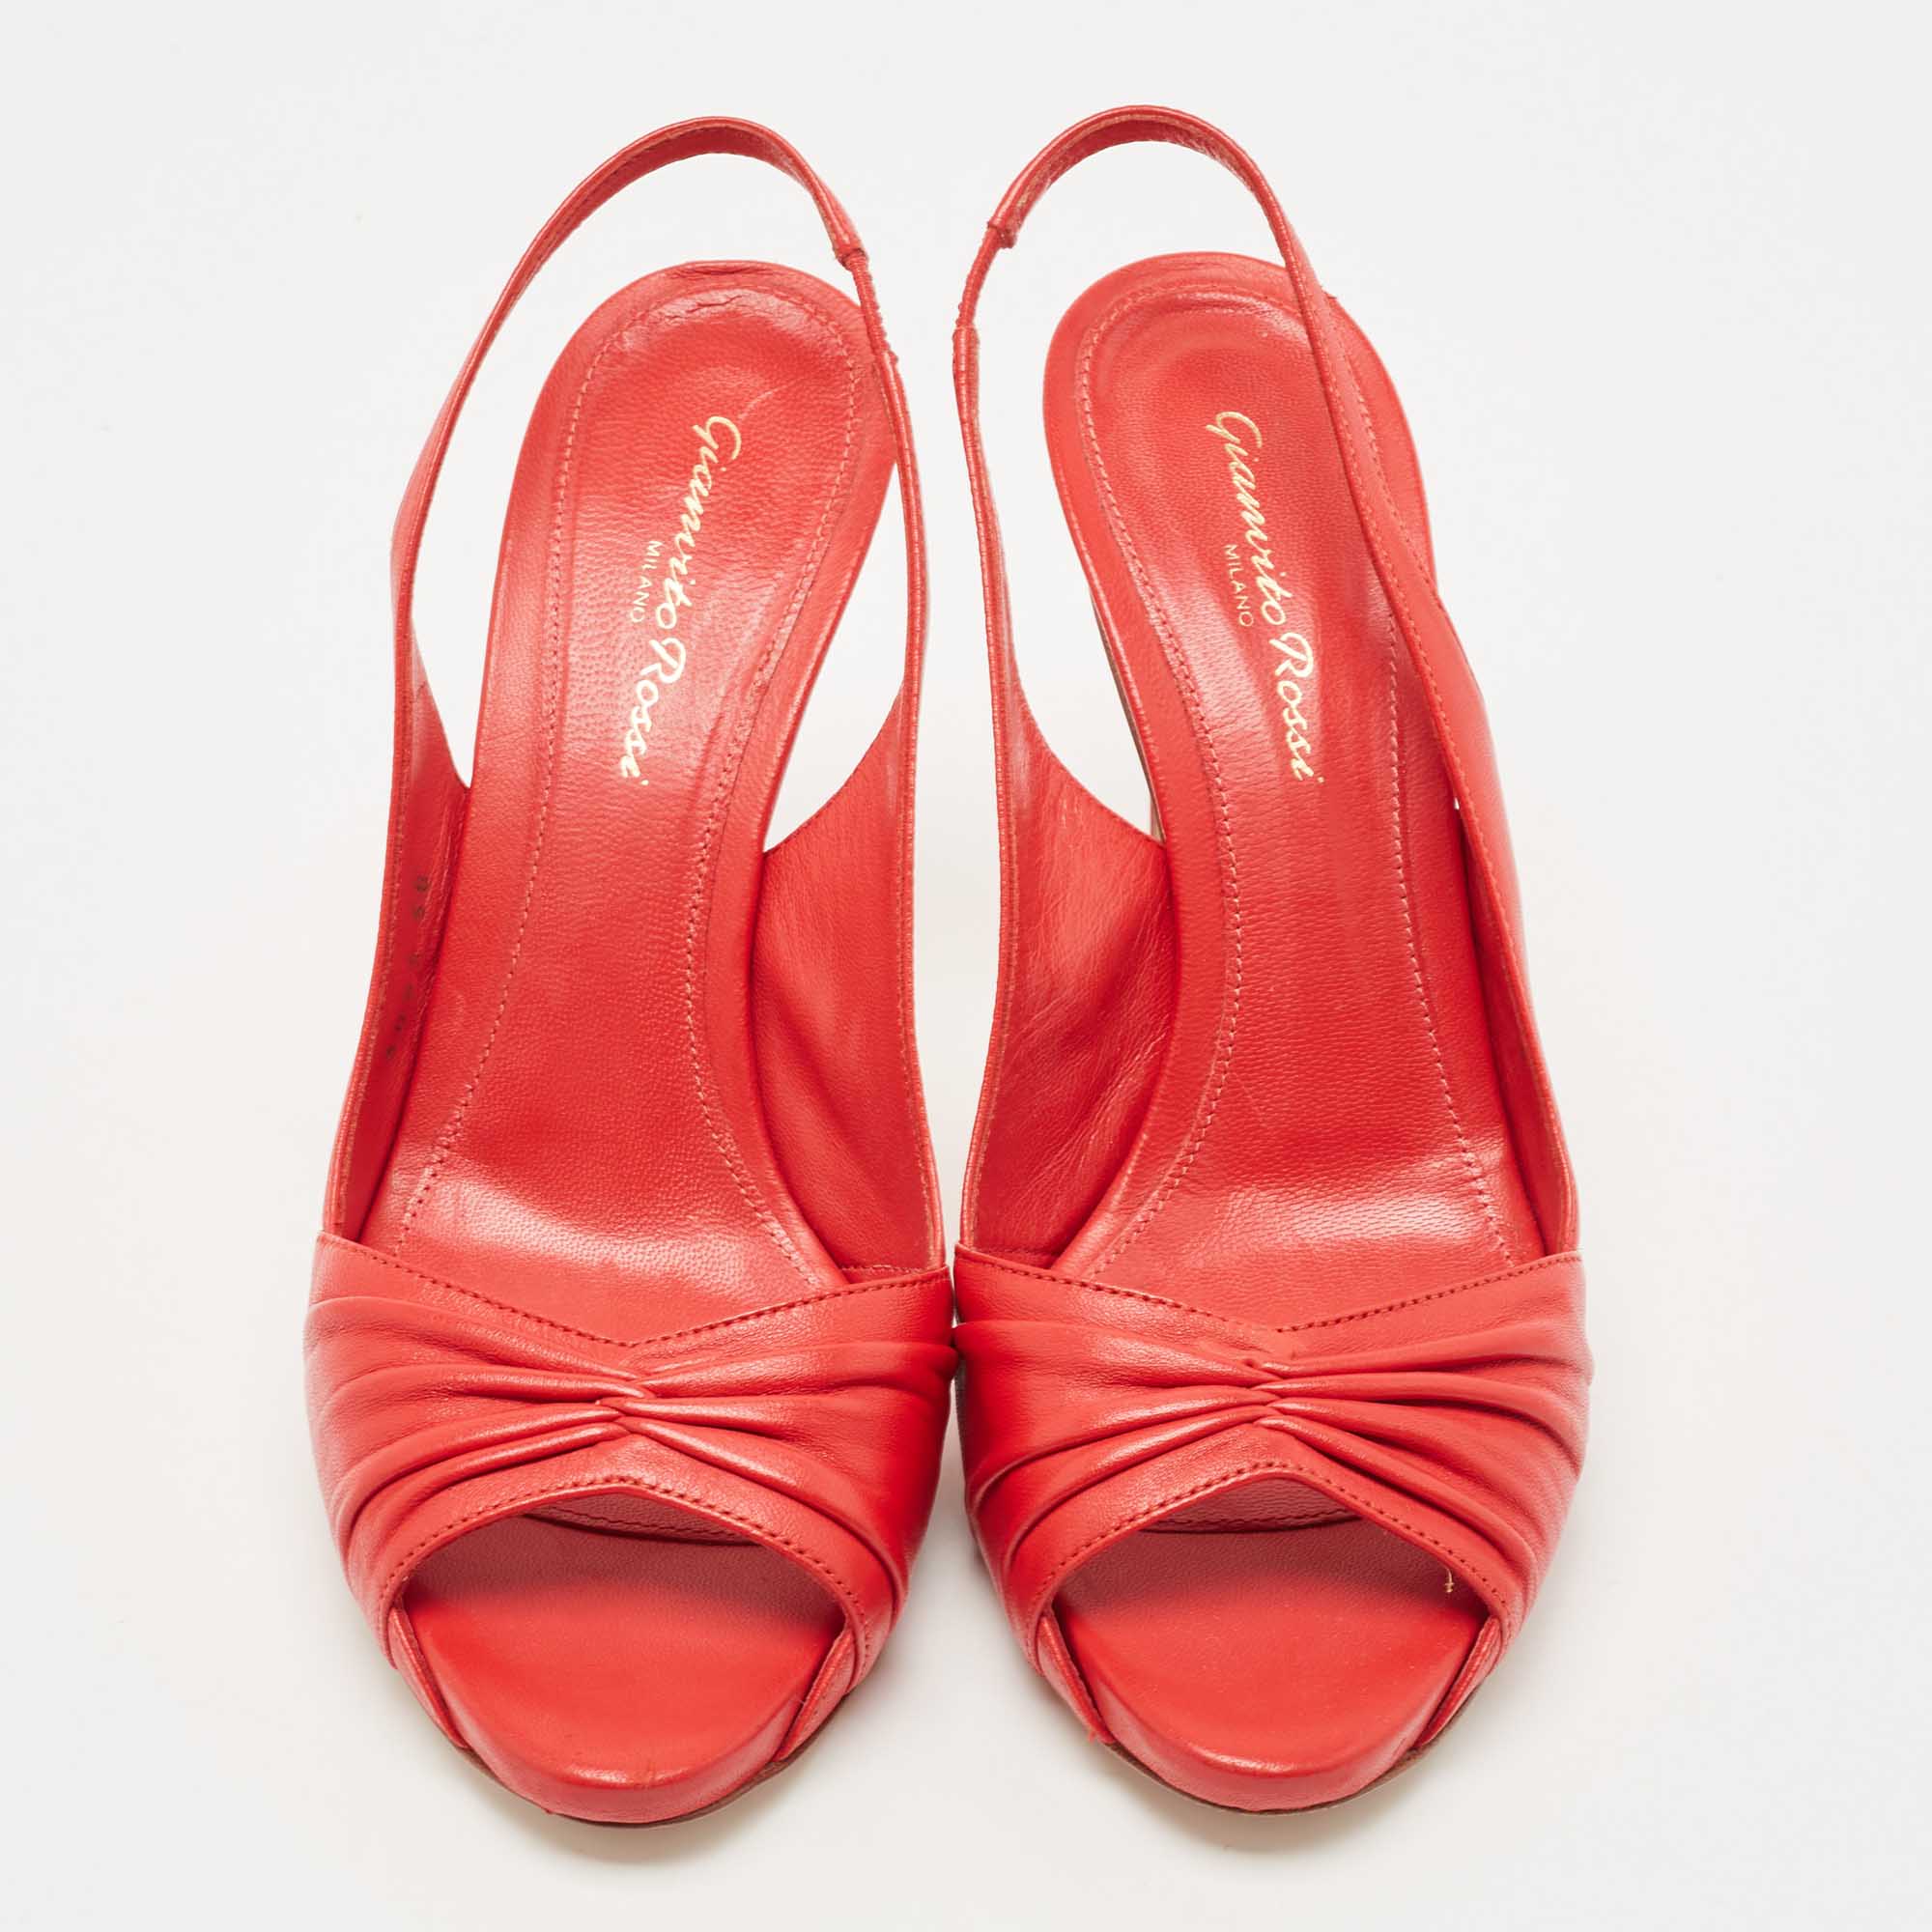 Gianvito Rossi Red Pleated Leather Open Toe Slingback Sandals Size 38